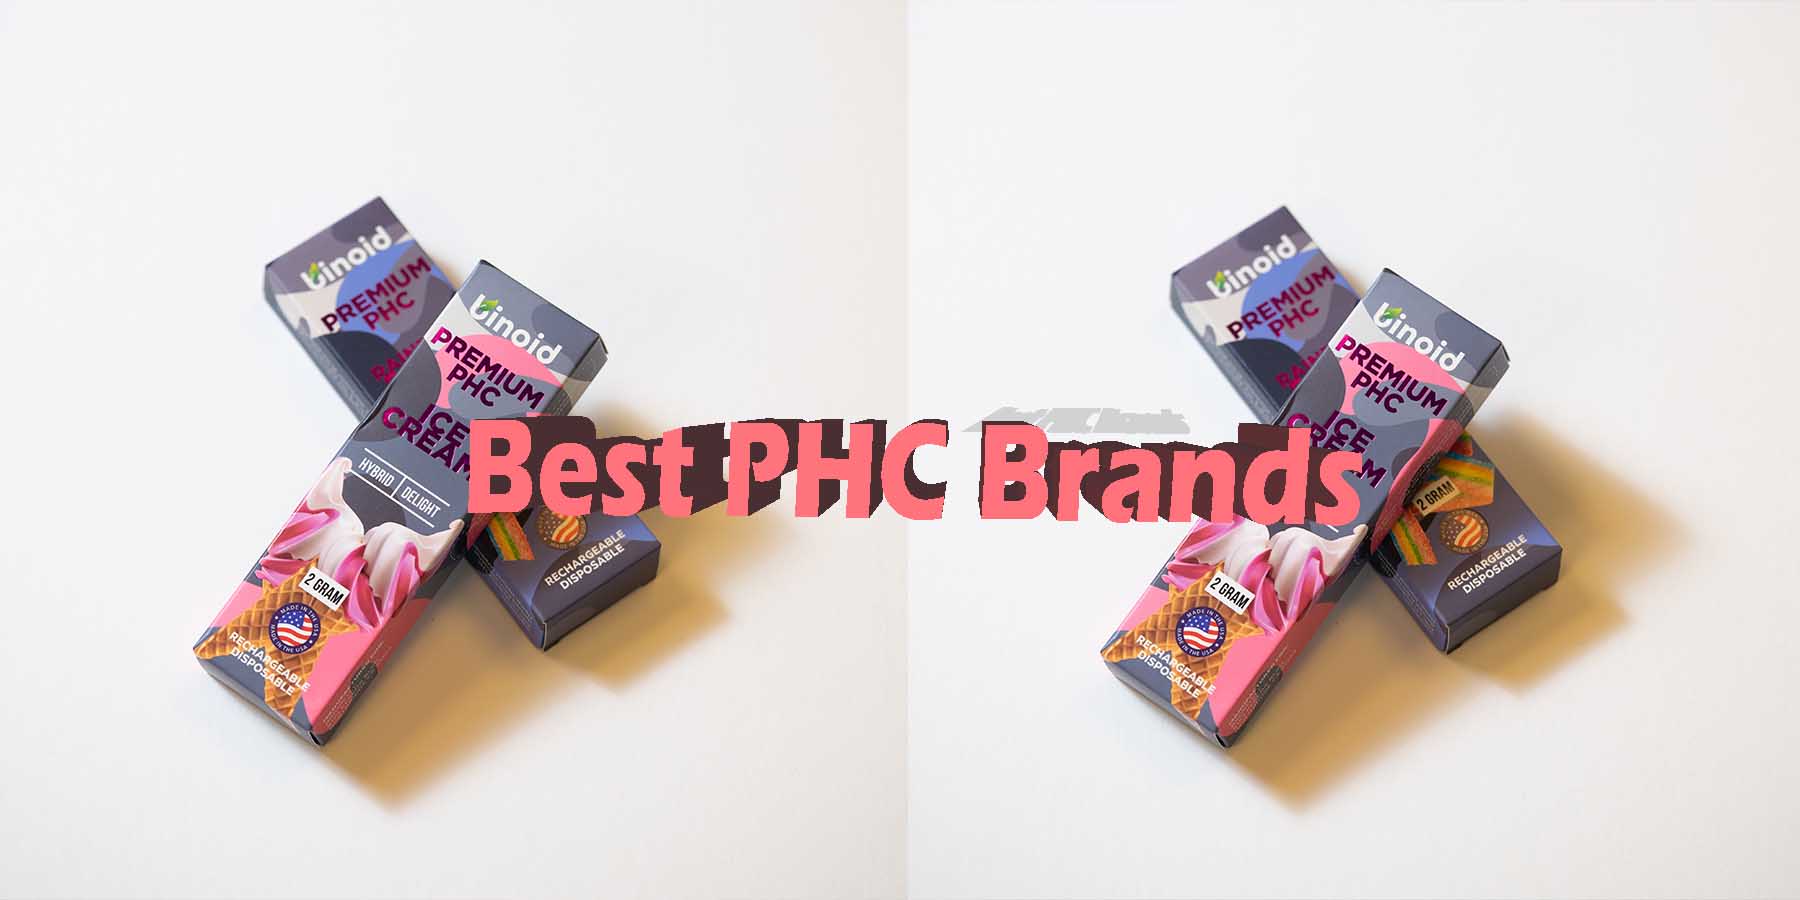 Best PHC Brands Disposable Vape 2 Gram Review Gram Take Work Online Best Brand Price Get Near Me Lowest Coupon Discount Store Shop Vapes Carts Online Strongest Binoid